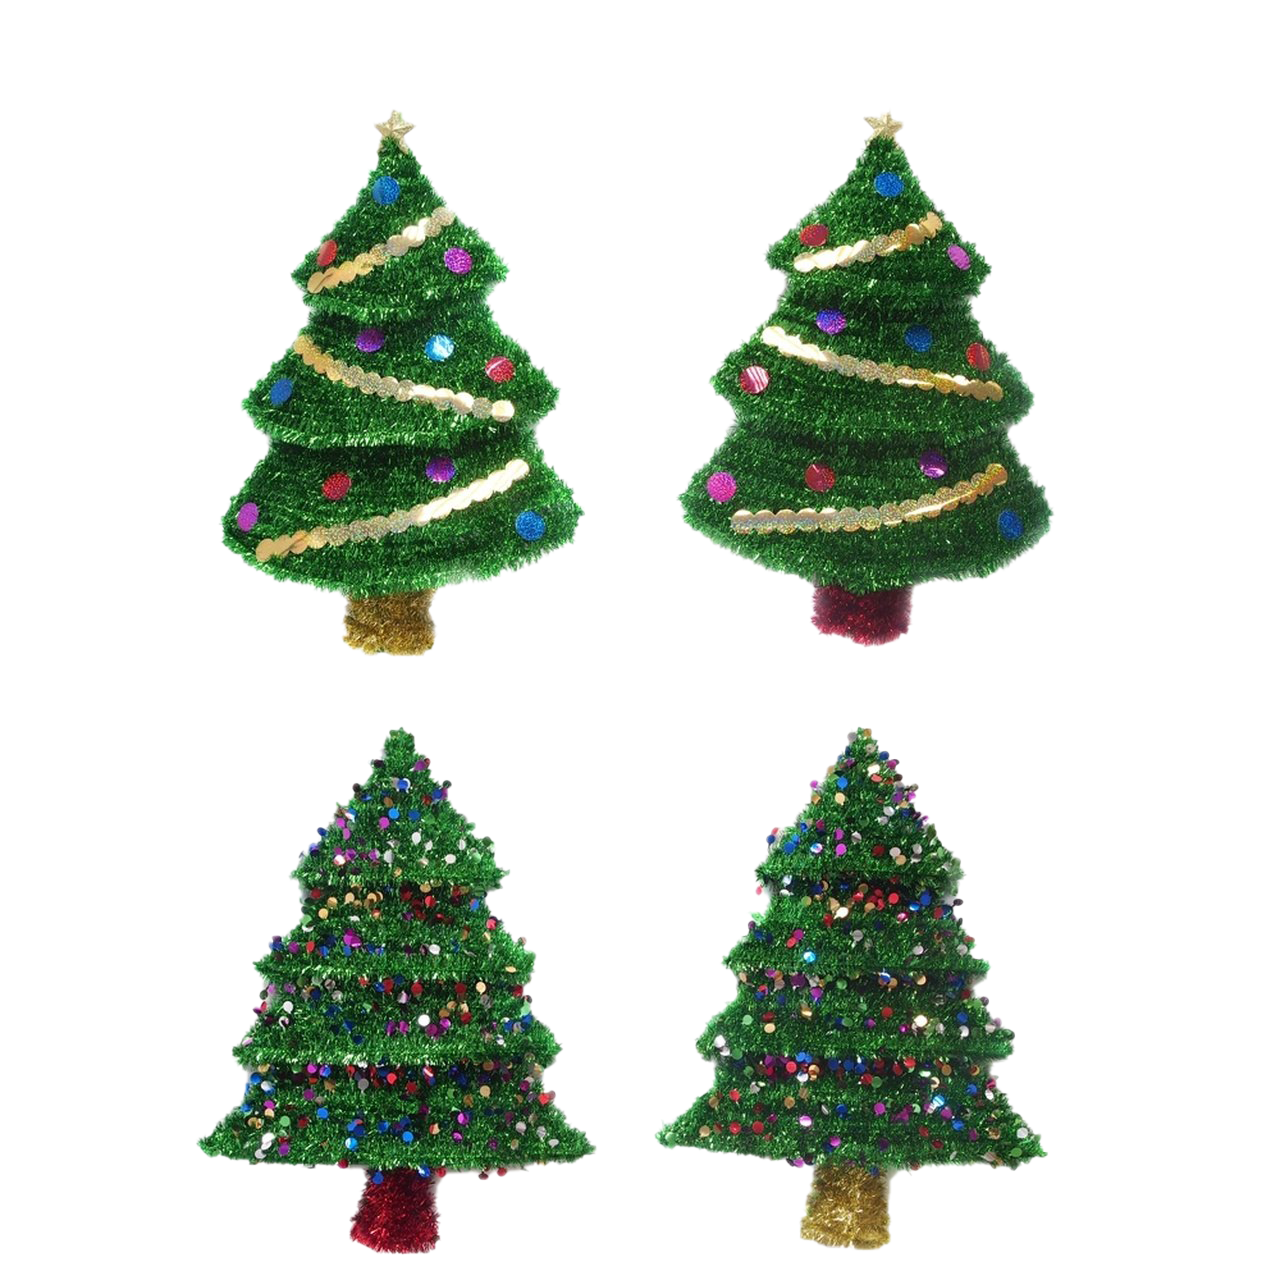 Download PNG image - Tinsel Christmas Tree Background PNG 